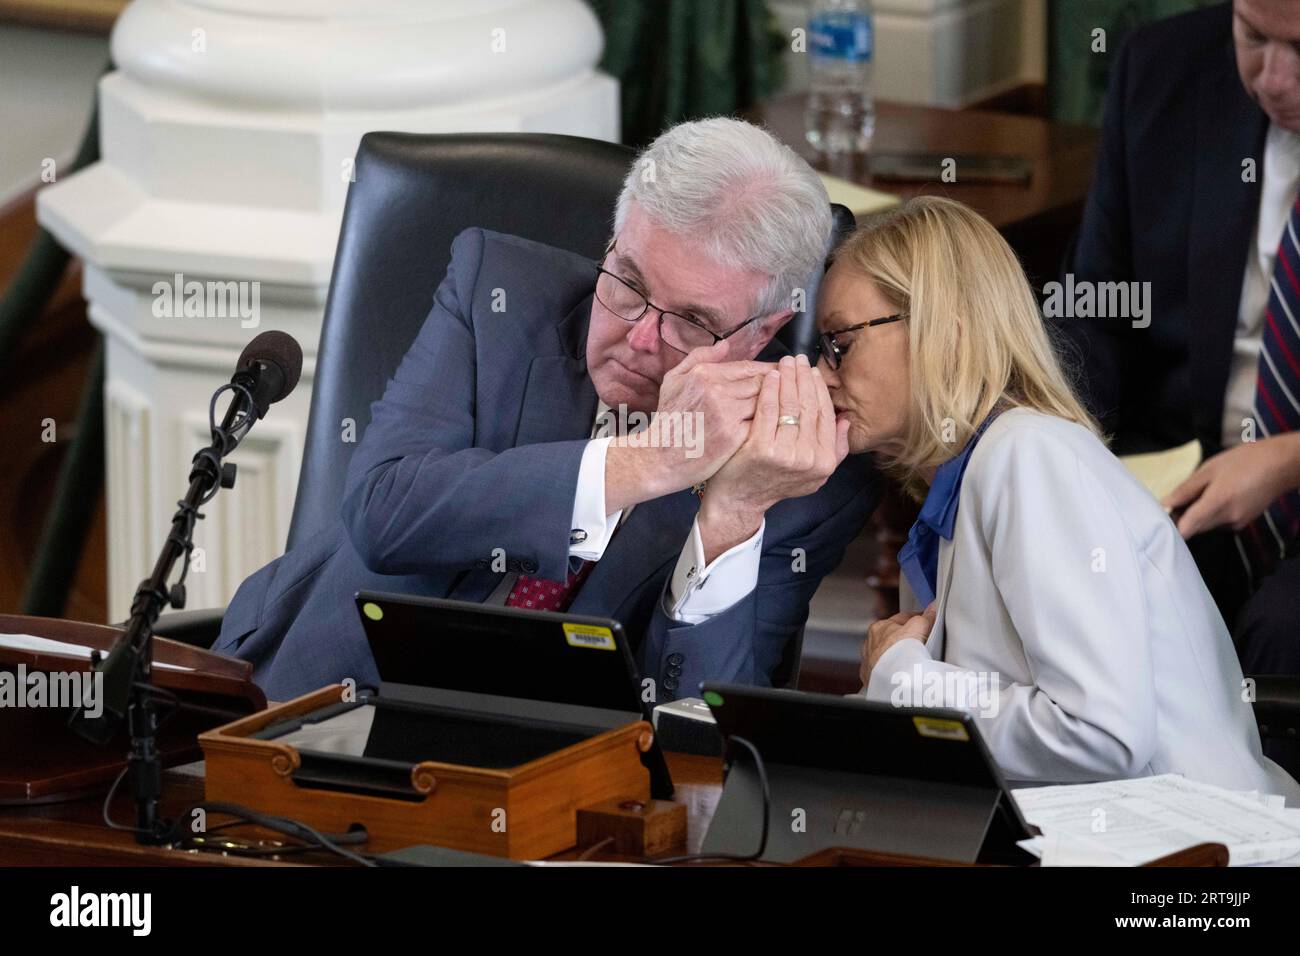 Austin, Texas, USA, September 11 2023: Texas Lt. Gov DAN PATRICK (left) and legal counsel LANA MYERS whisper during a ruling on day 5 of suspended Texas Attorney General Ken Paxton's impeachment trial in the Texas Senate. Patrick, who is not an attorney, is serving as the trial judge, with help from Myers, a retired district court judge. Credit: Bob Daemmrich/Alamy Live News Stock Photo